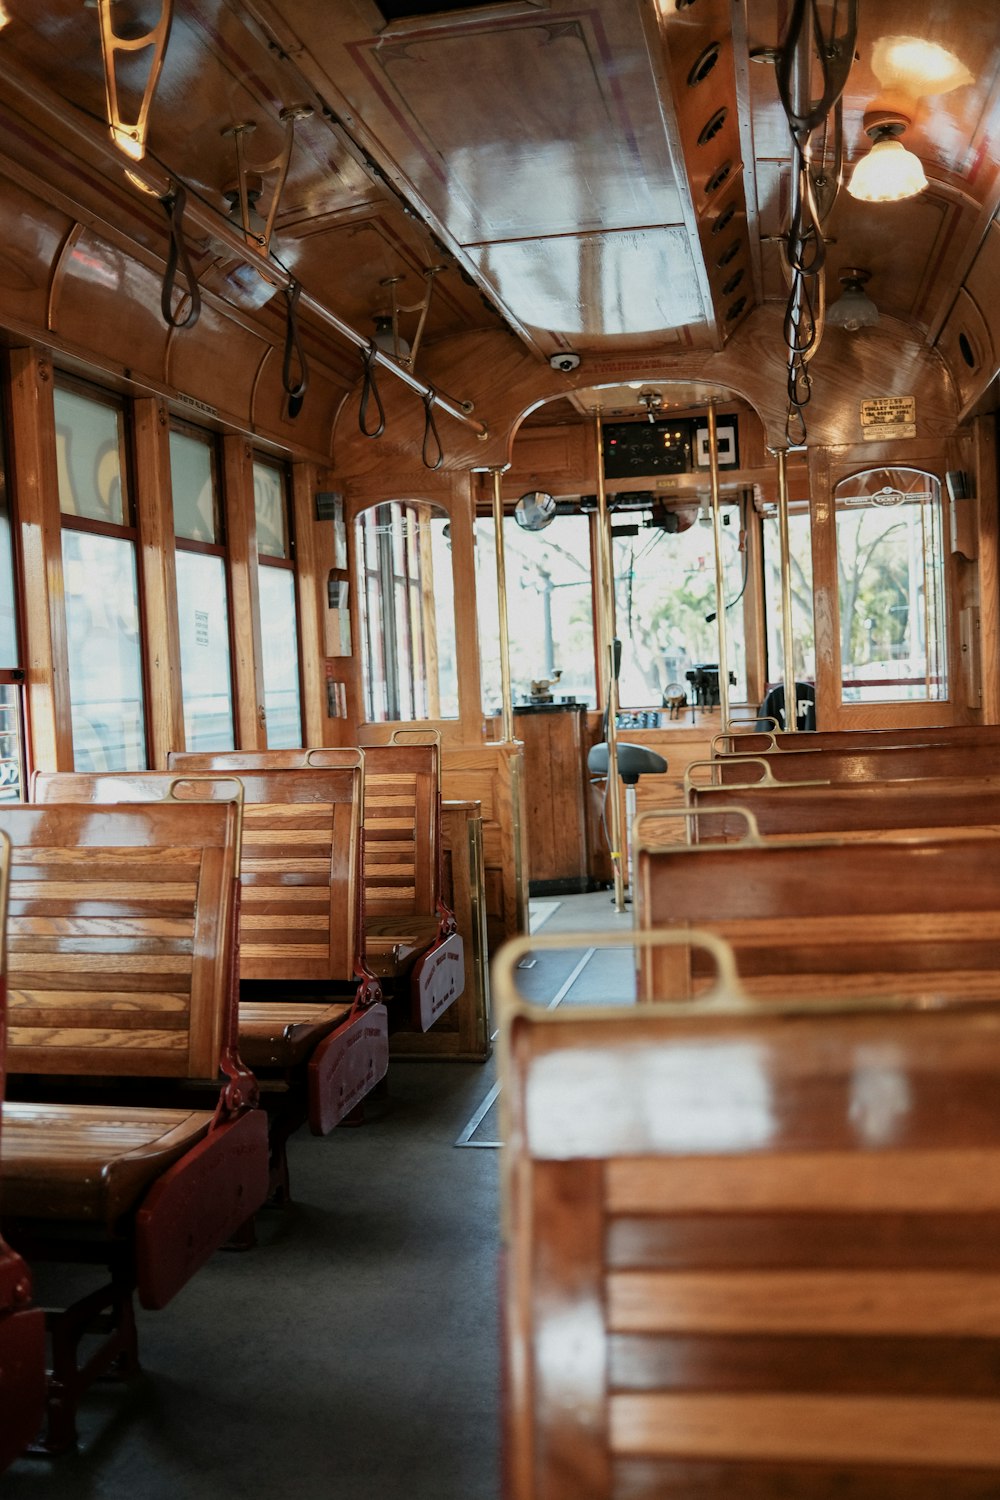 the inside of a train car with wooden seats